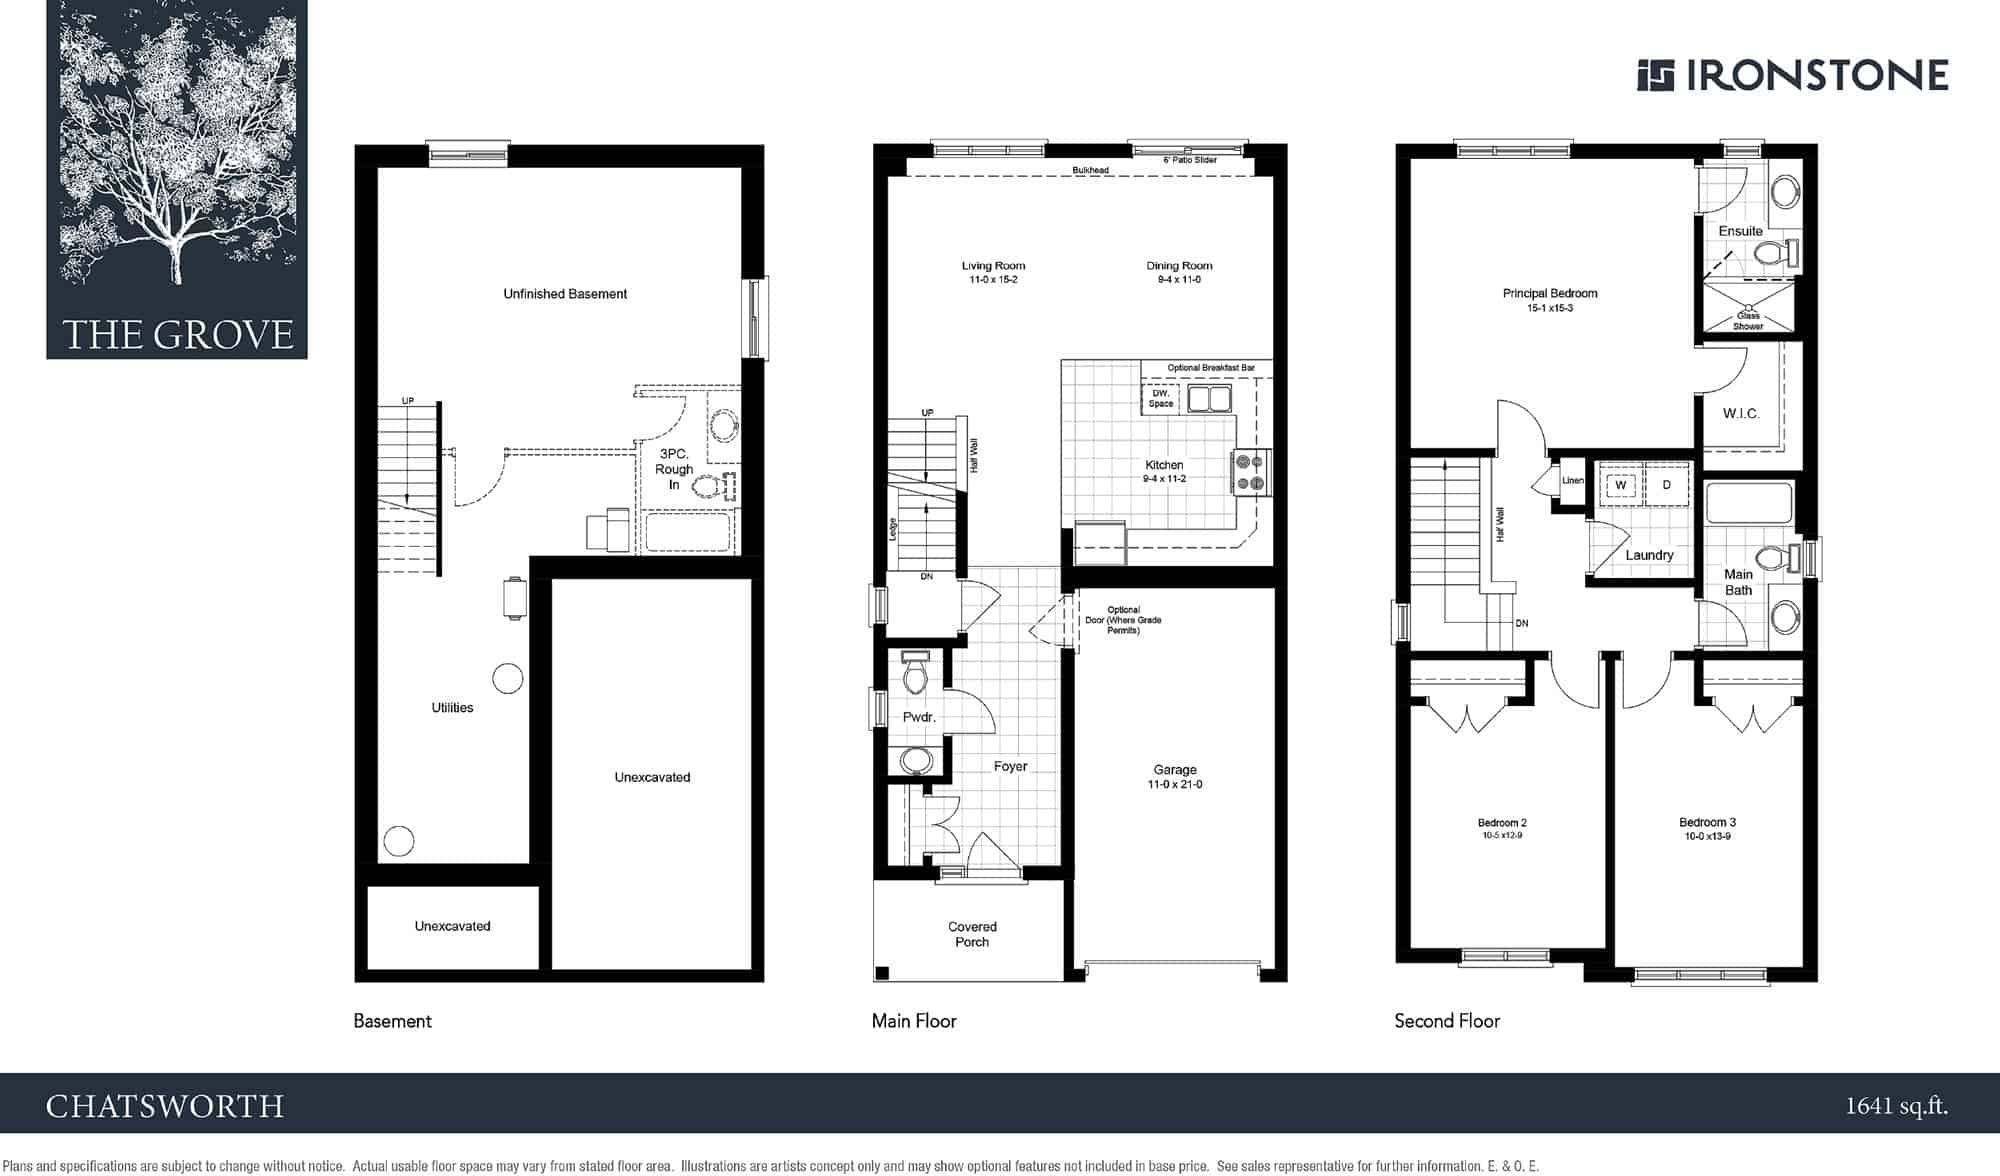  147 Julie Crescent  Floor Plan of  The Grove with undefined beds